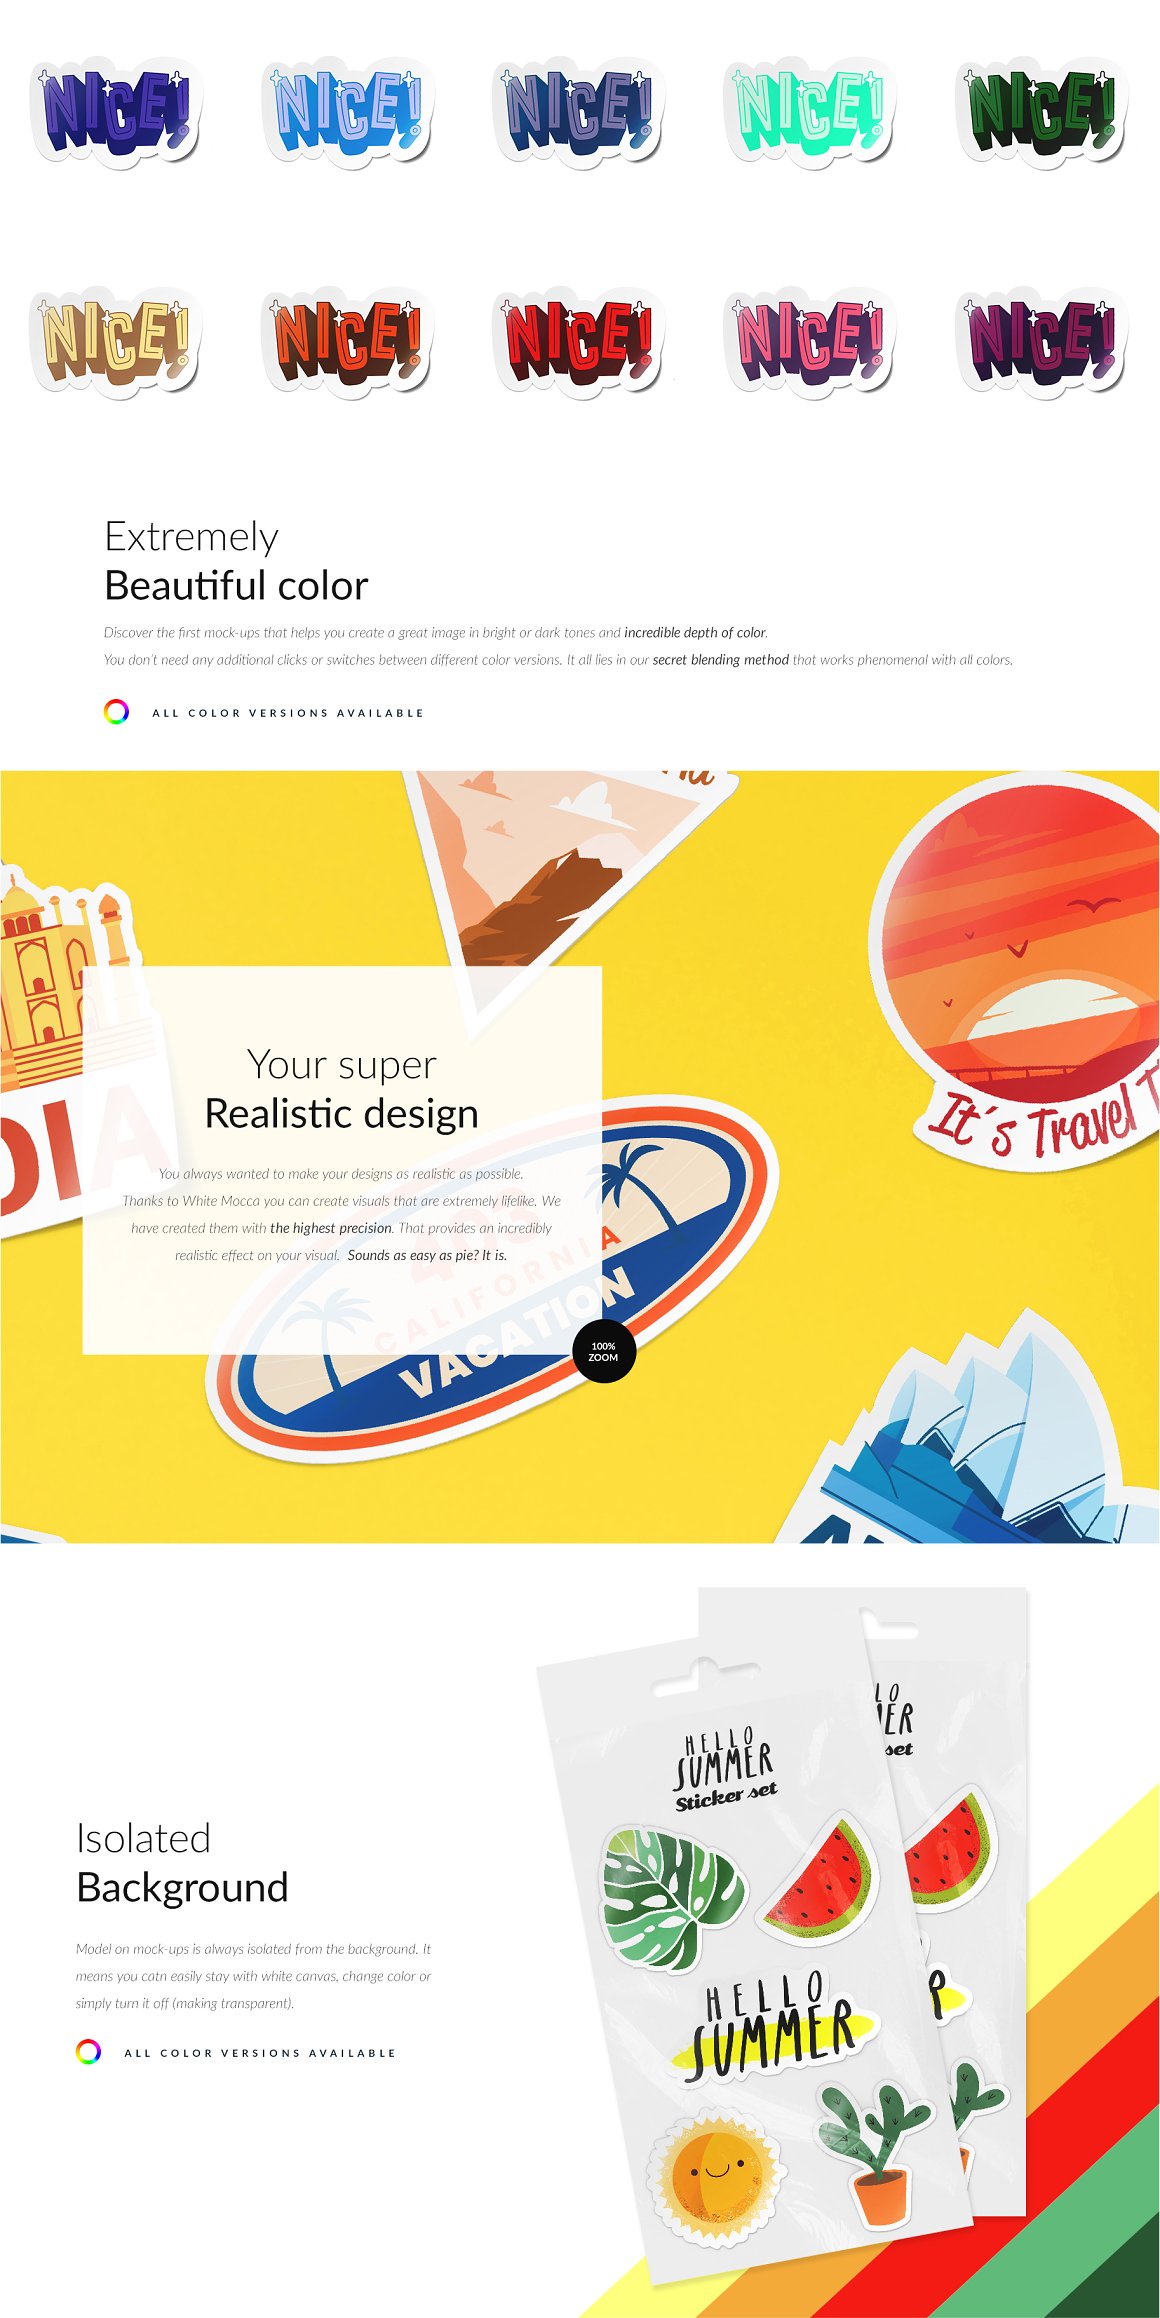 Image pack with great sticker mockups.